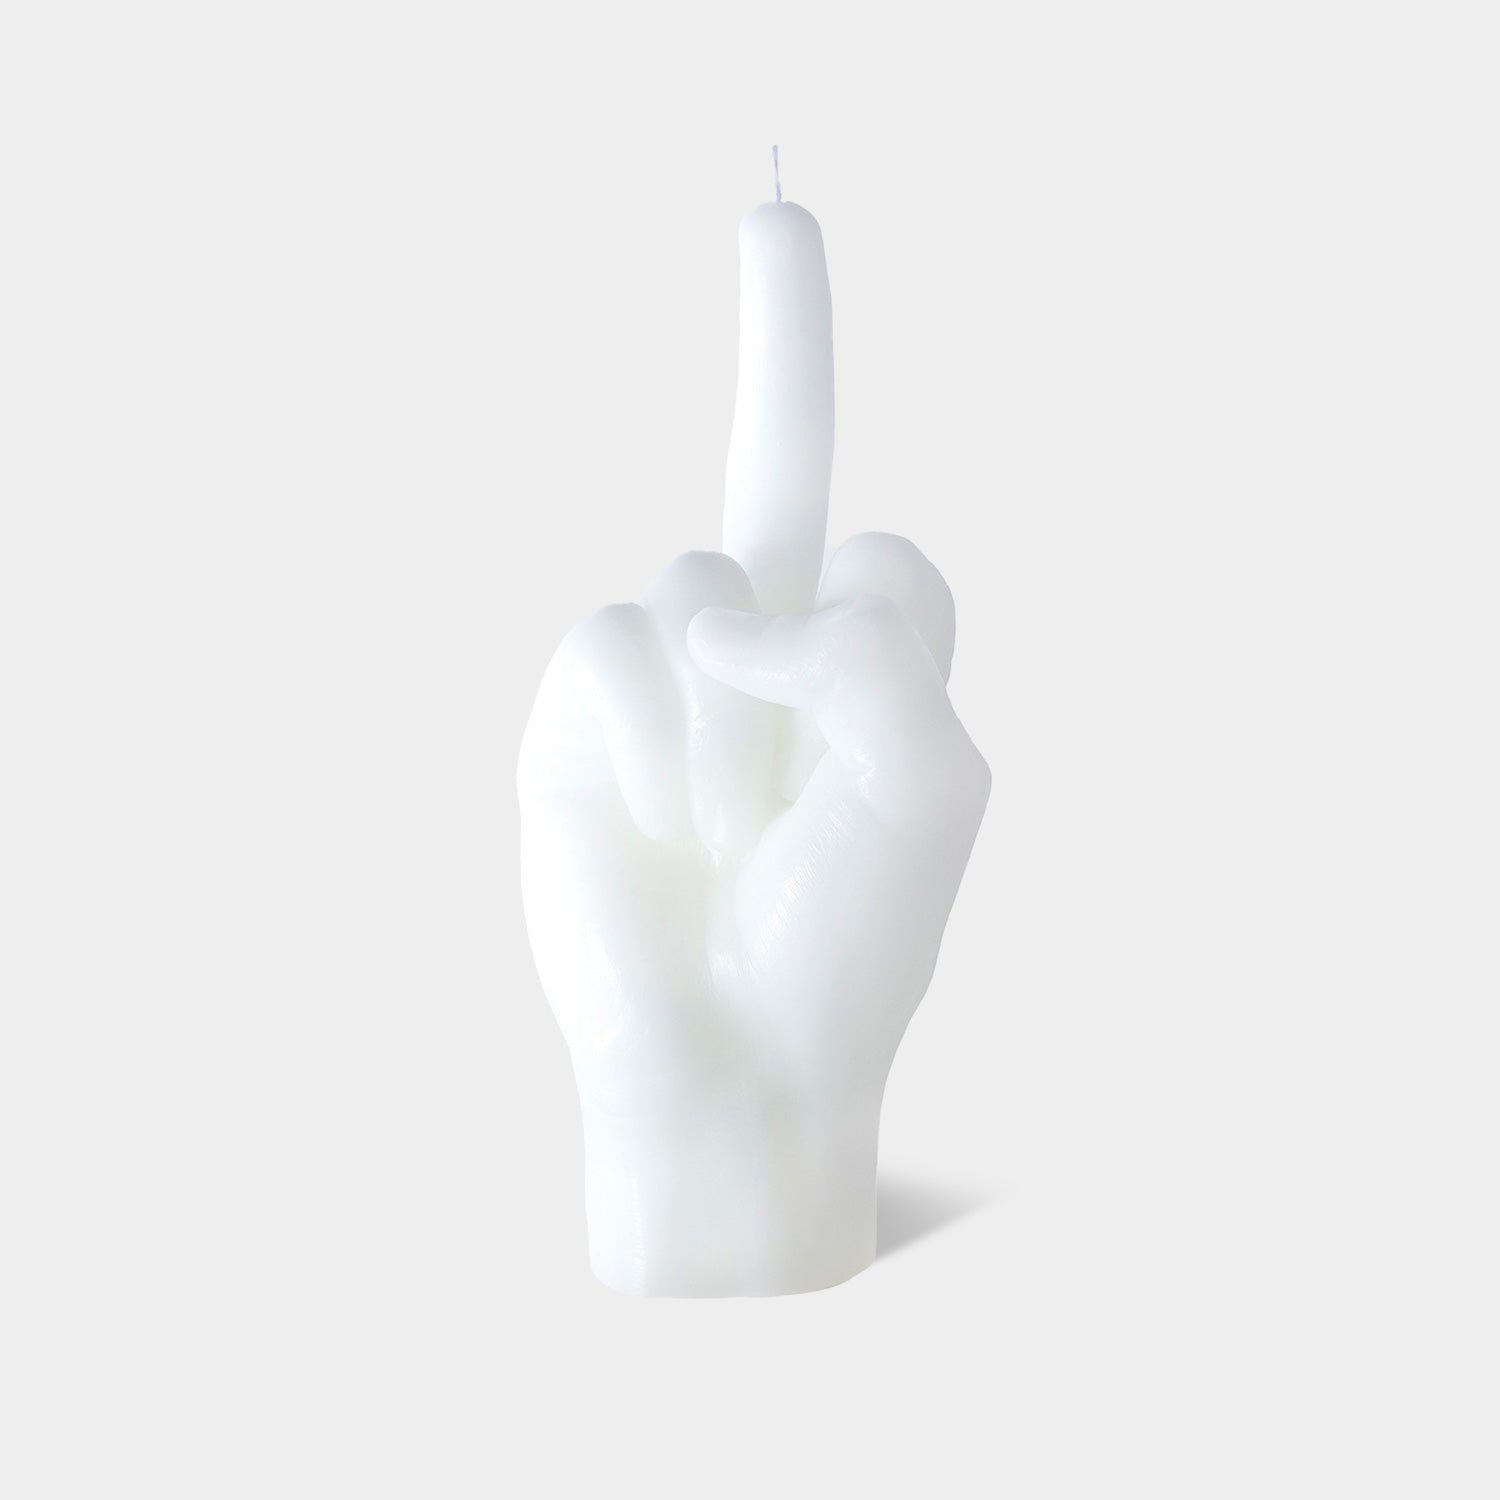 Candellana Middle Finger Candle, Hand-Gesture, Realistic, Modern Home Decor  (4x8.5-inch, Brass Metallic)